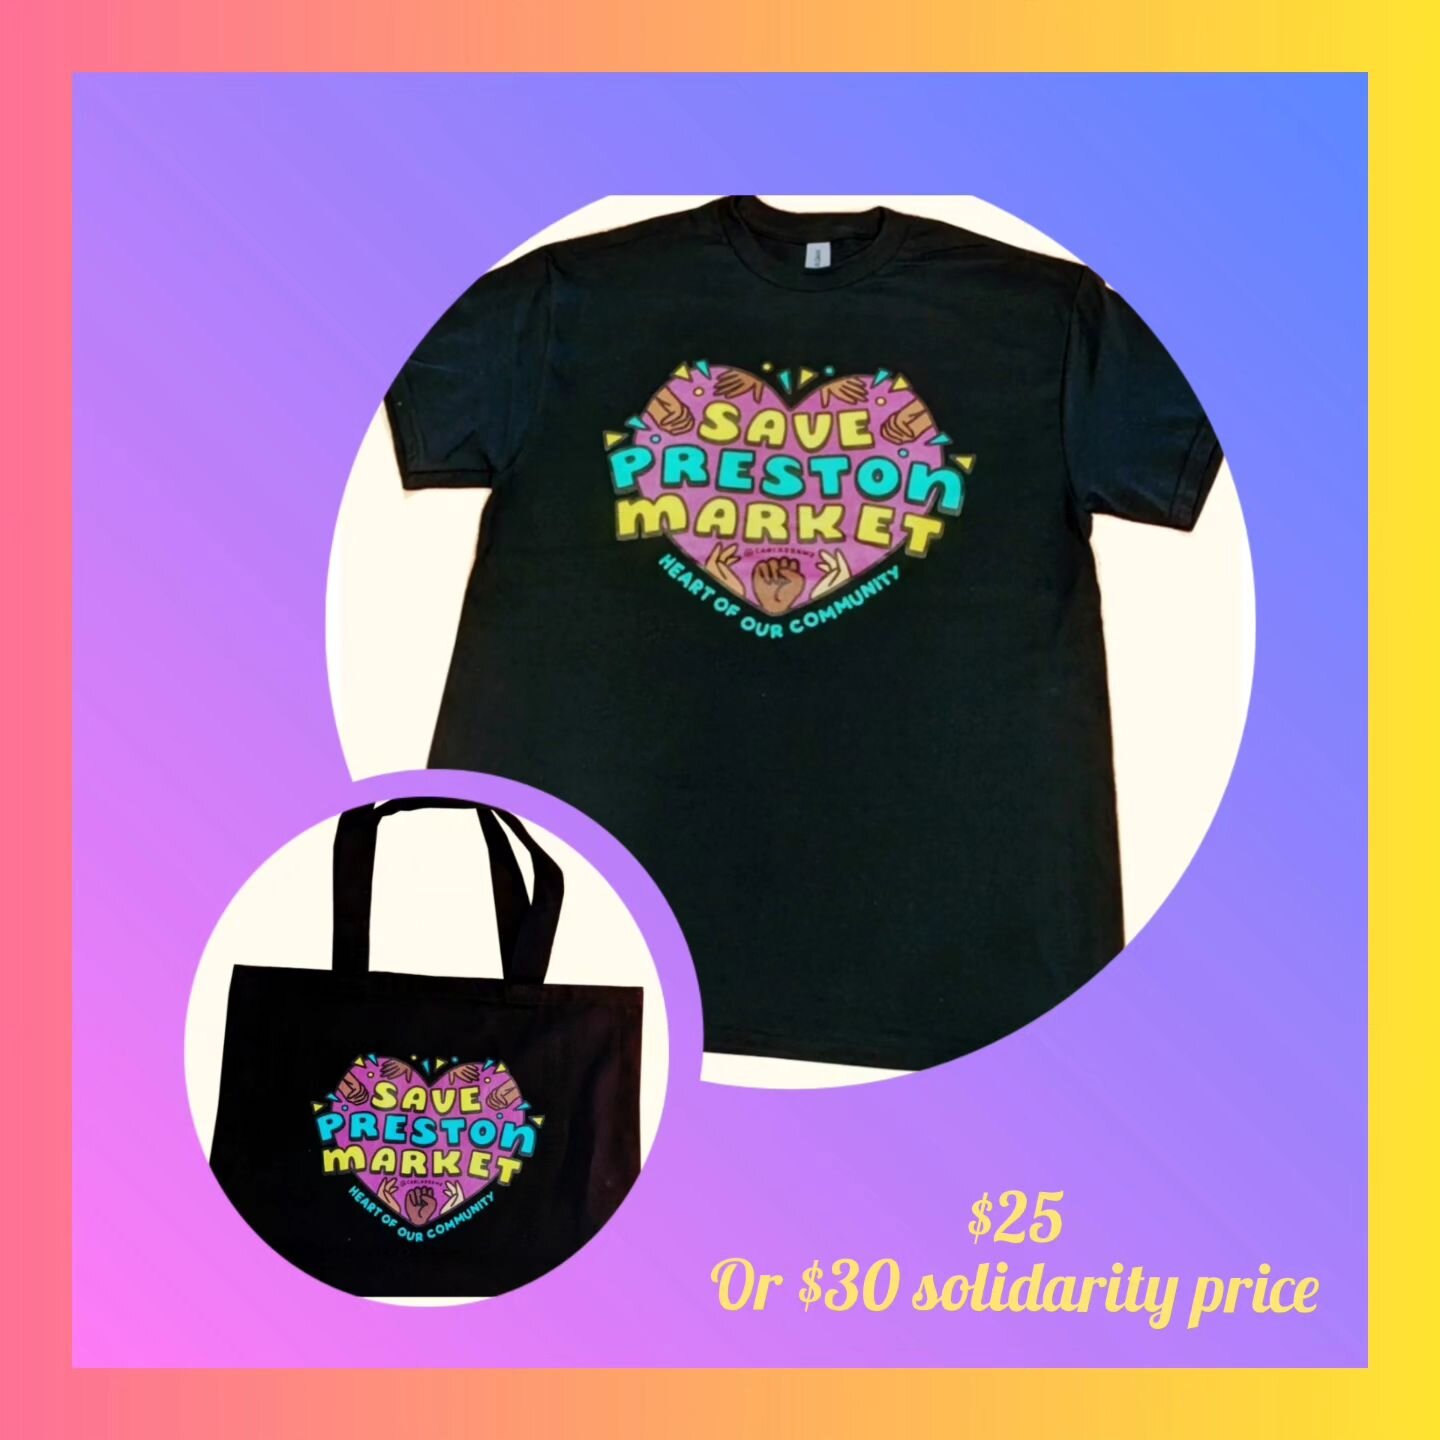 Get our tees and totes now before Xmas! Perfect gift for any rabble rousing  lover of the Preston market 💗
If you order now they can be picked up on Cramer St before Xmas 🎁

Order via link in bio ✅️